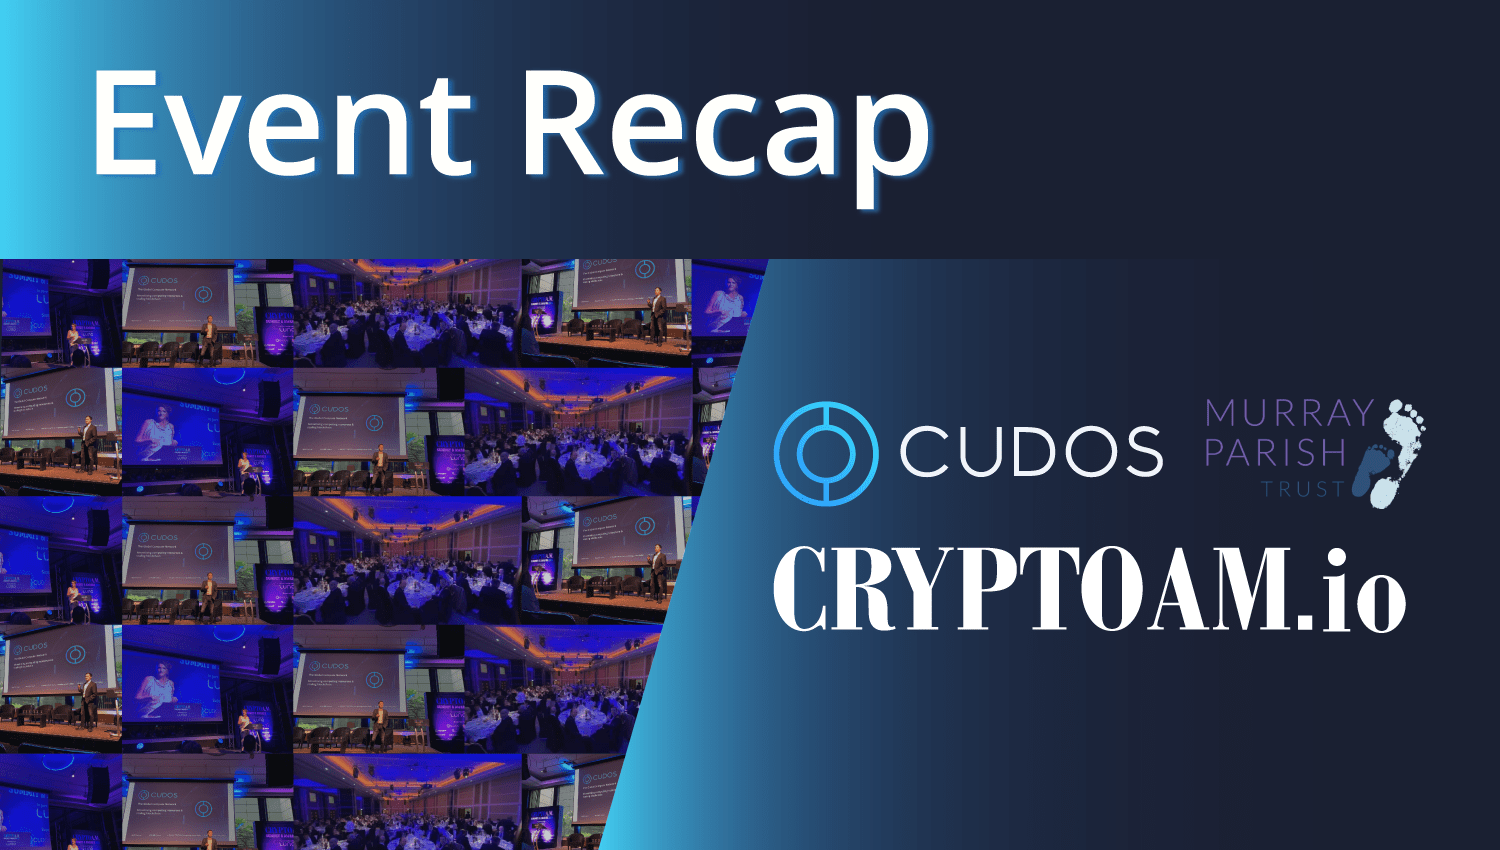 Cudos leads the blockchain discussion while supporting the children’s emergency services